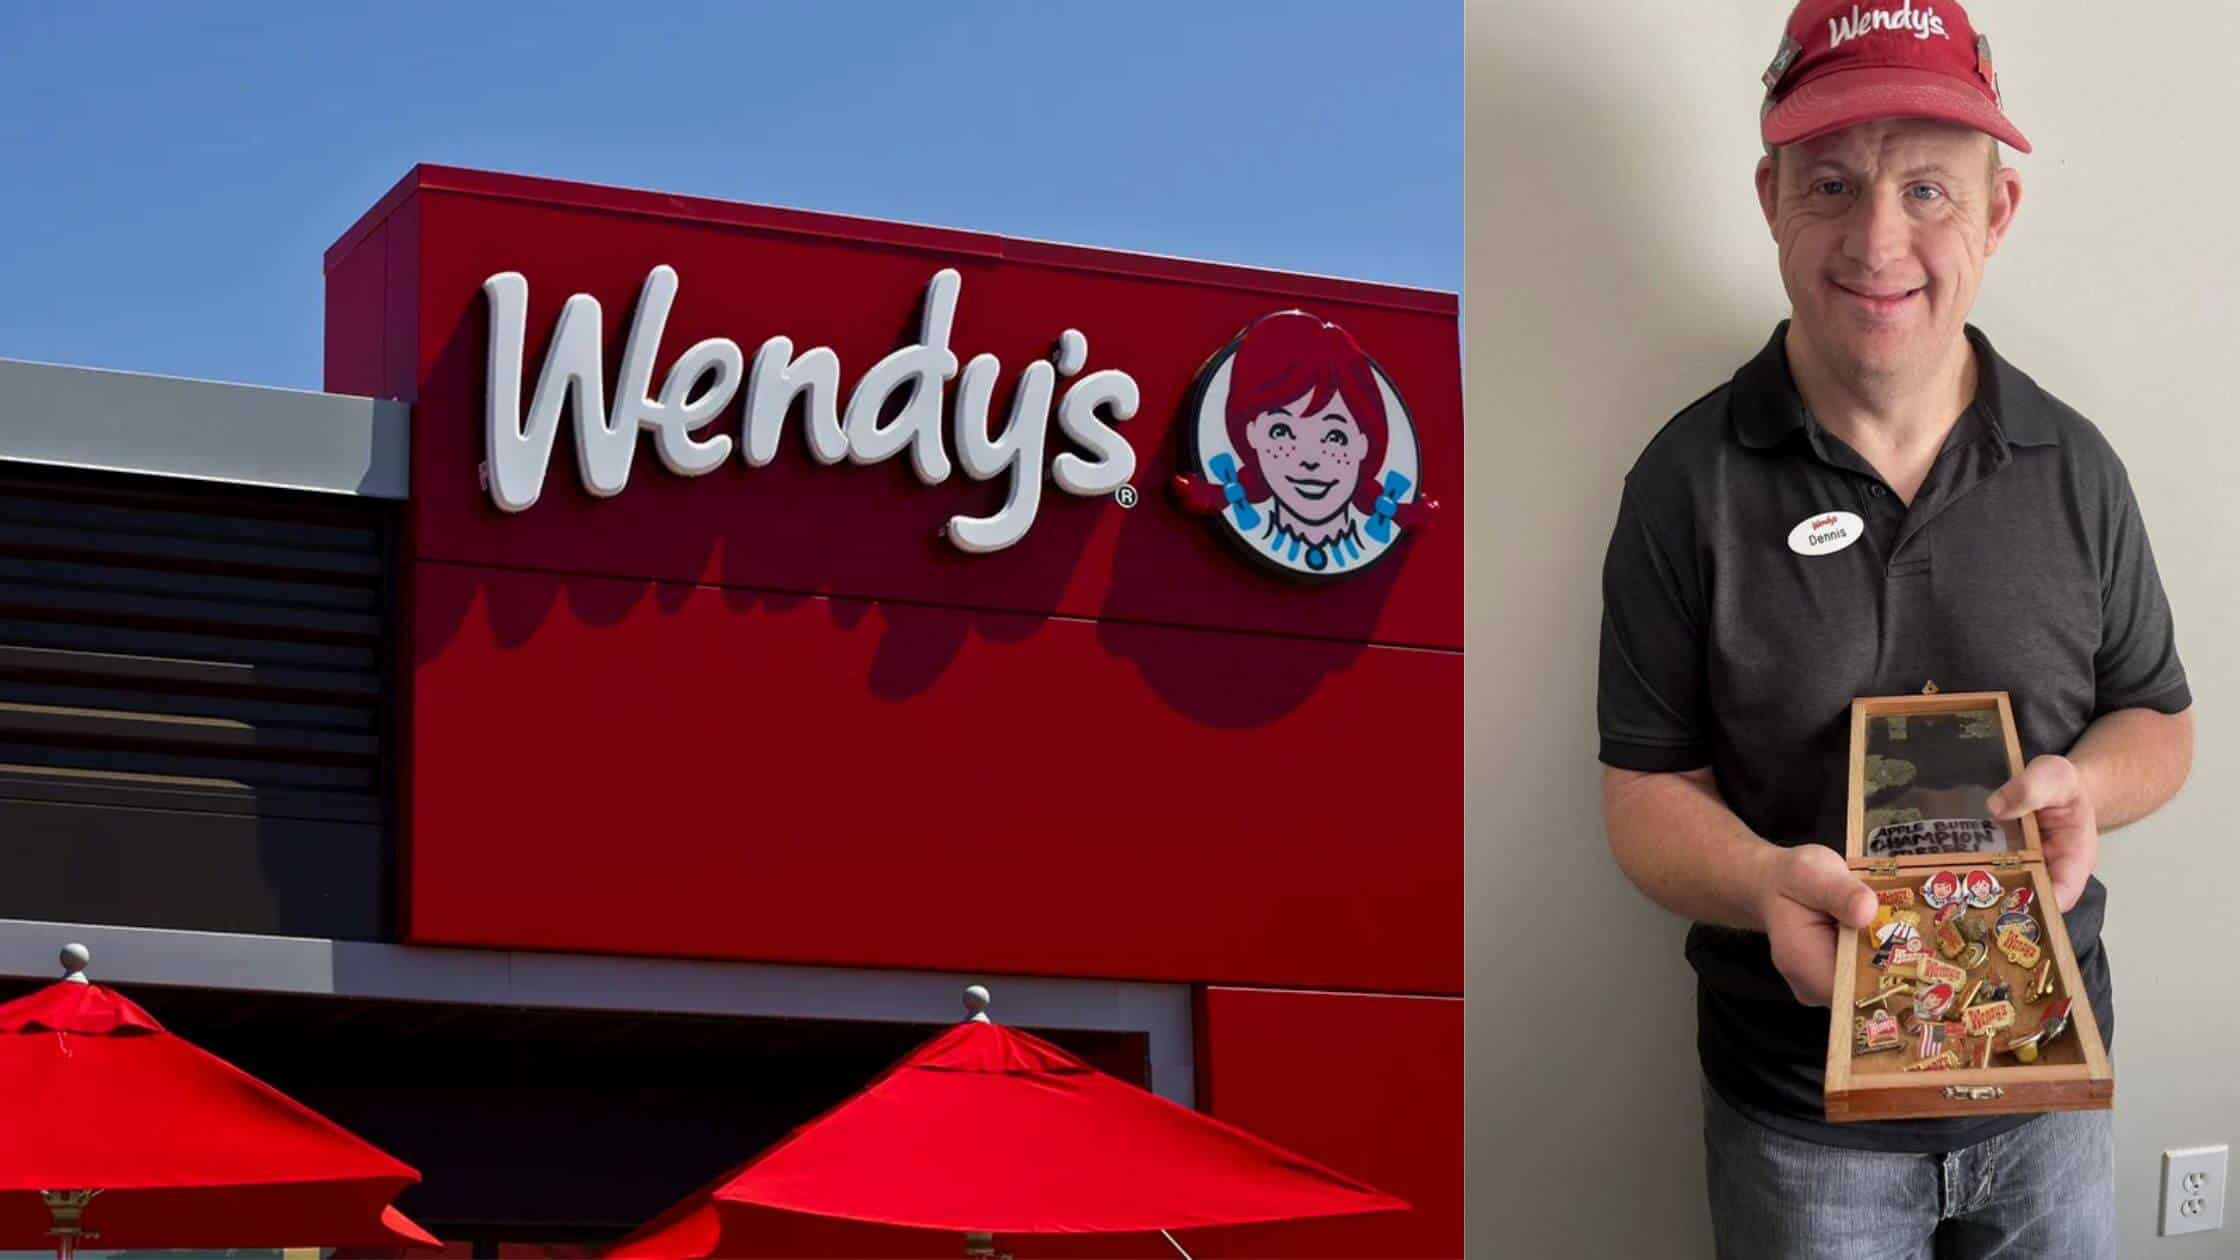 A Man With Down Syndrome Is Rehired After Being Fired Without Notice After 20 Years At Wendy's